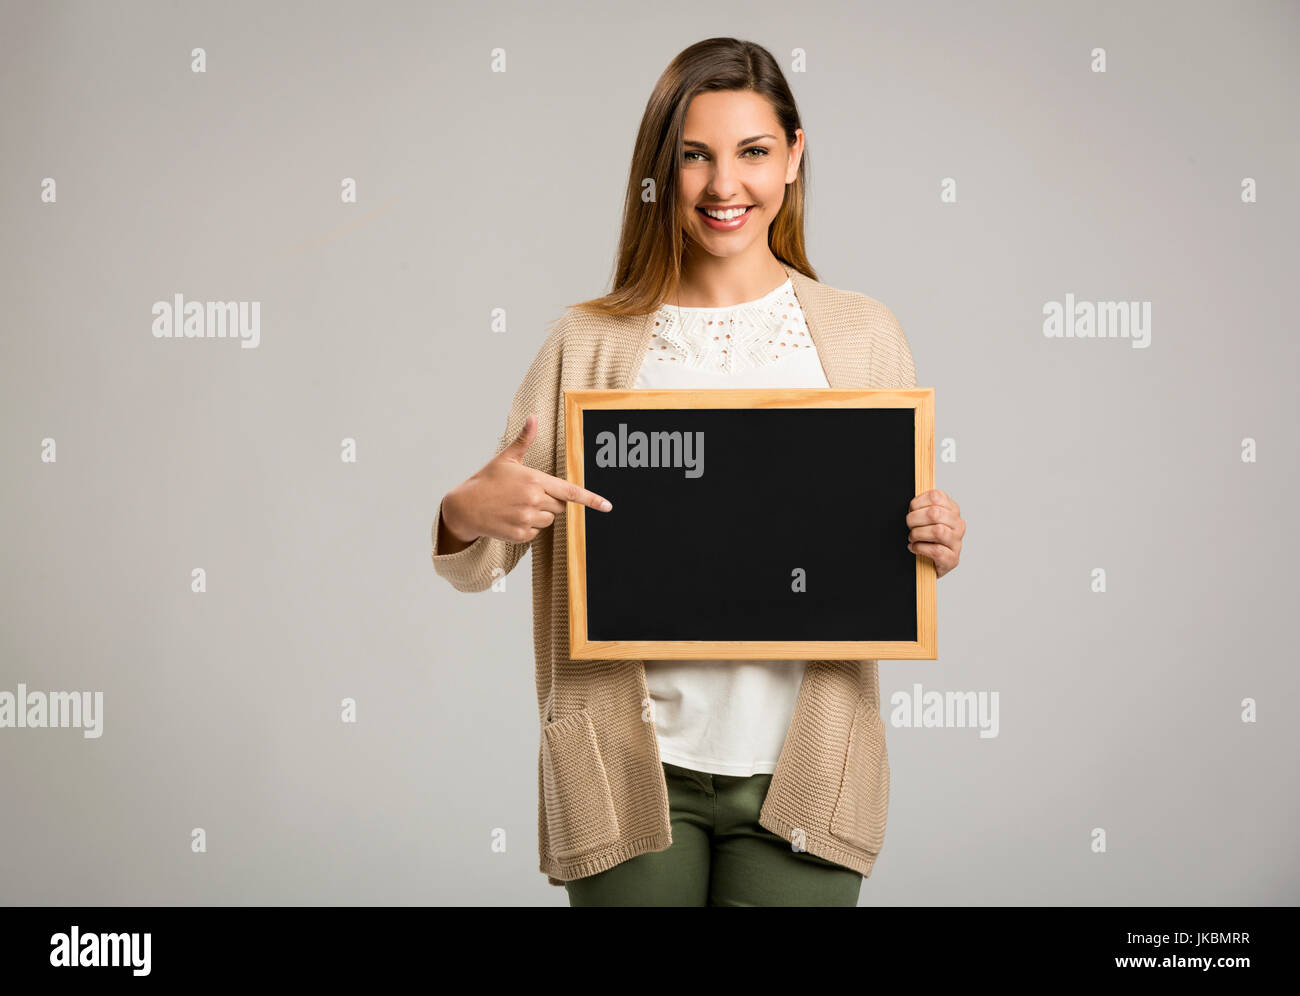 Beautiful and happy woman holding and pointing to a chalkboard Stock Photo